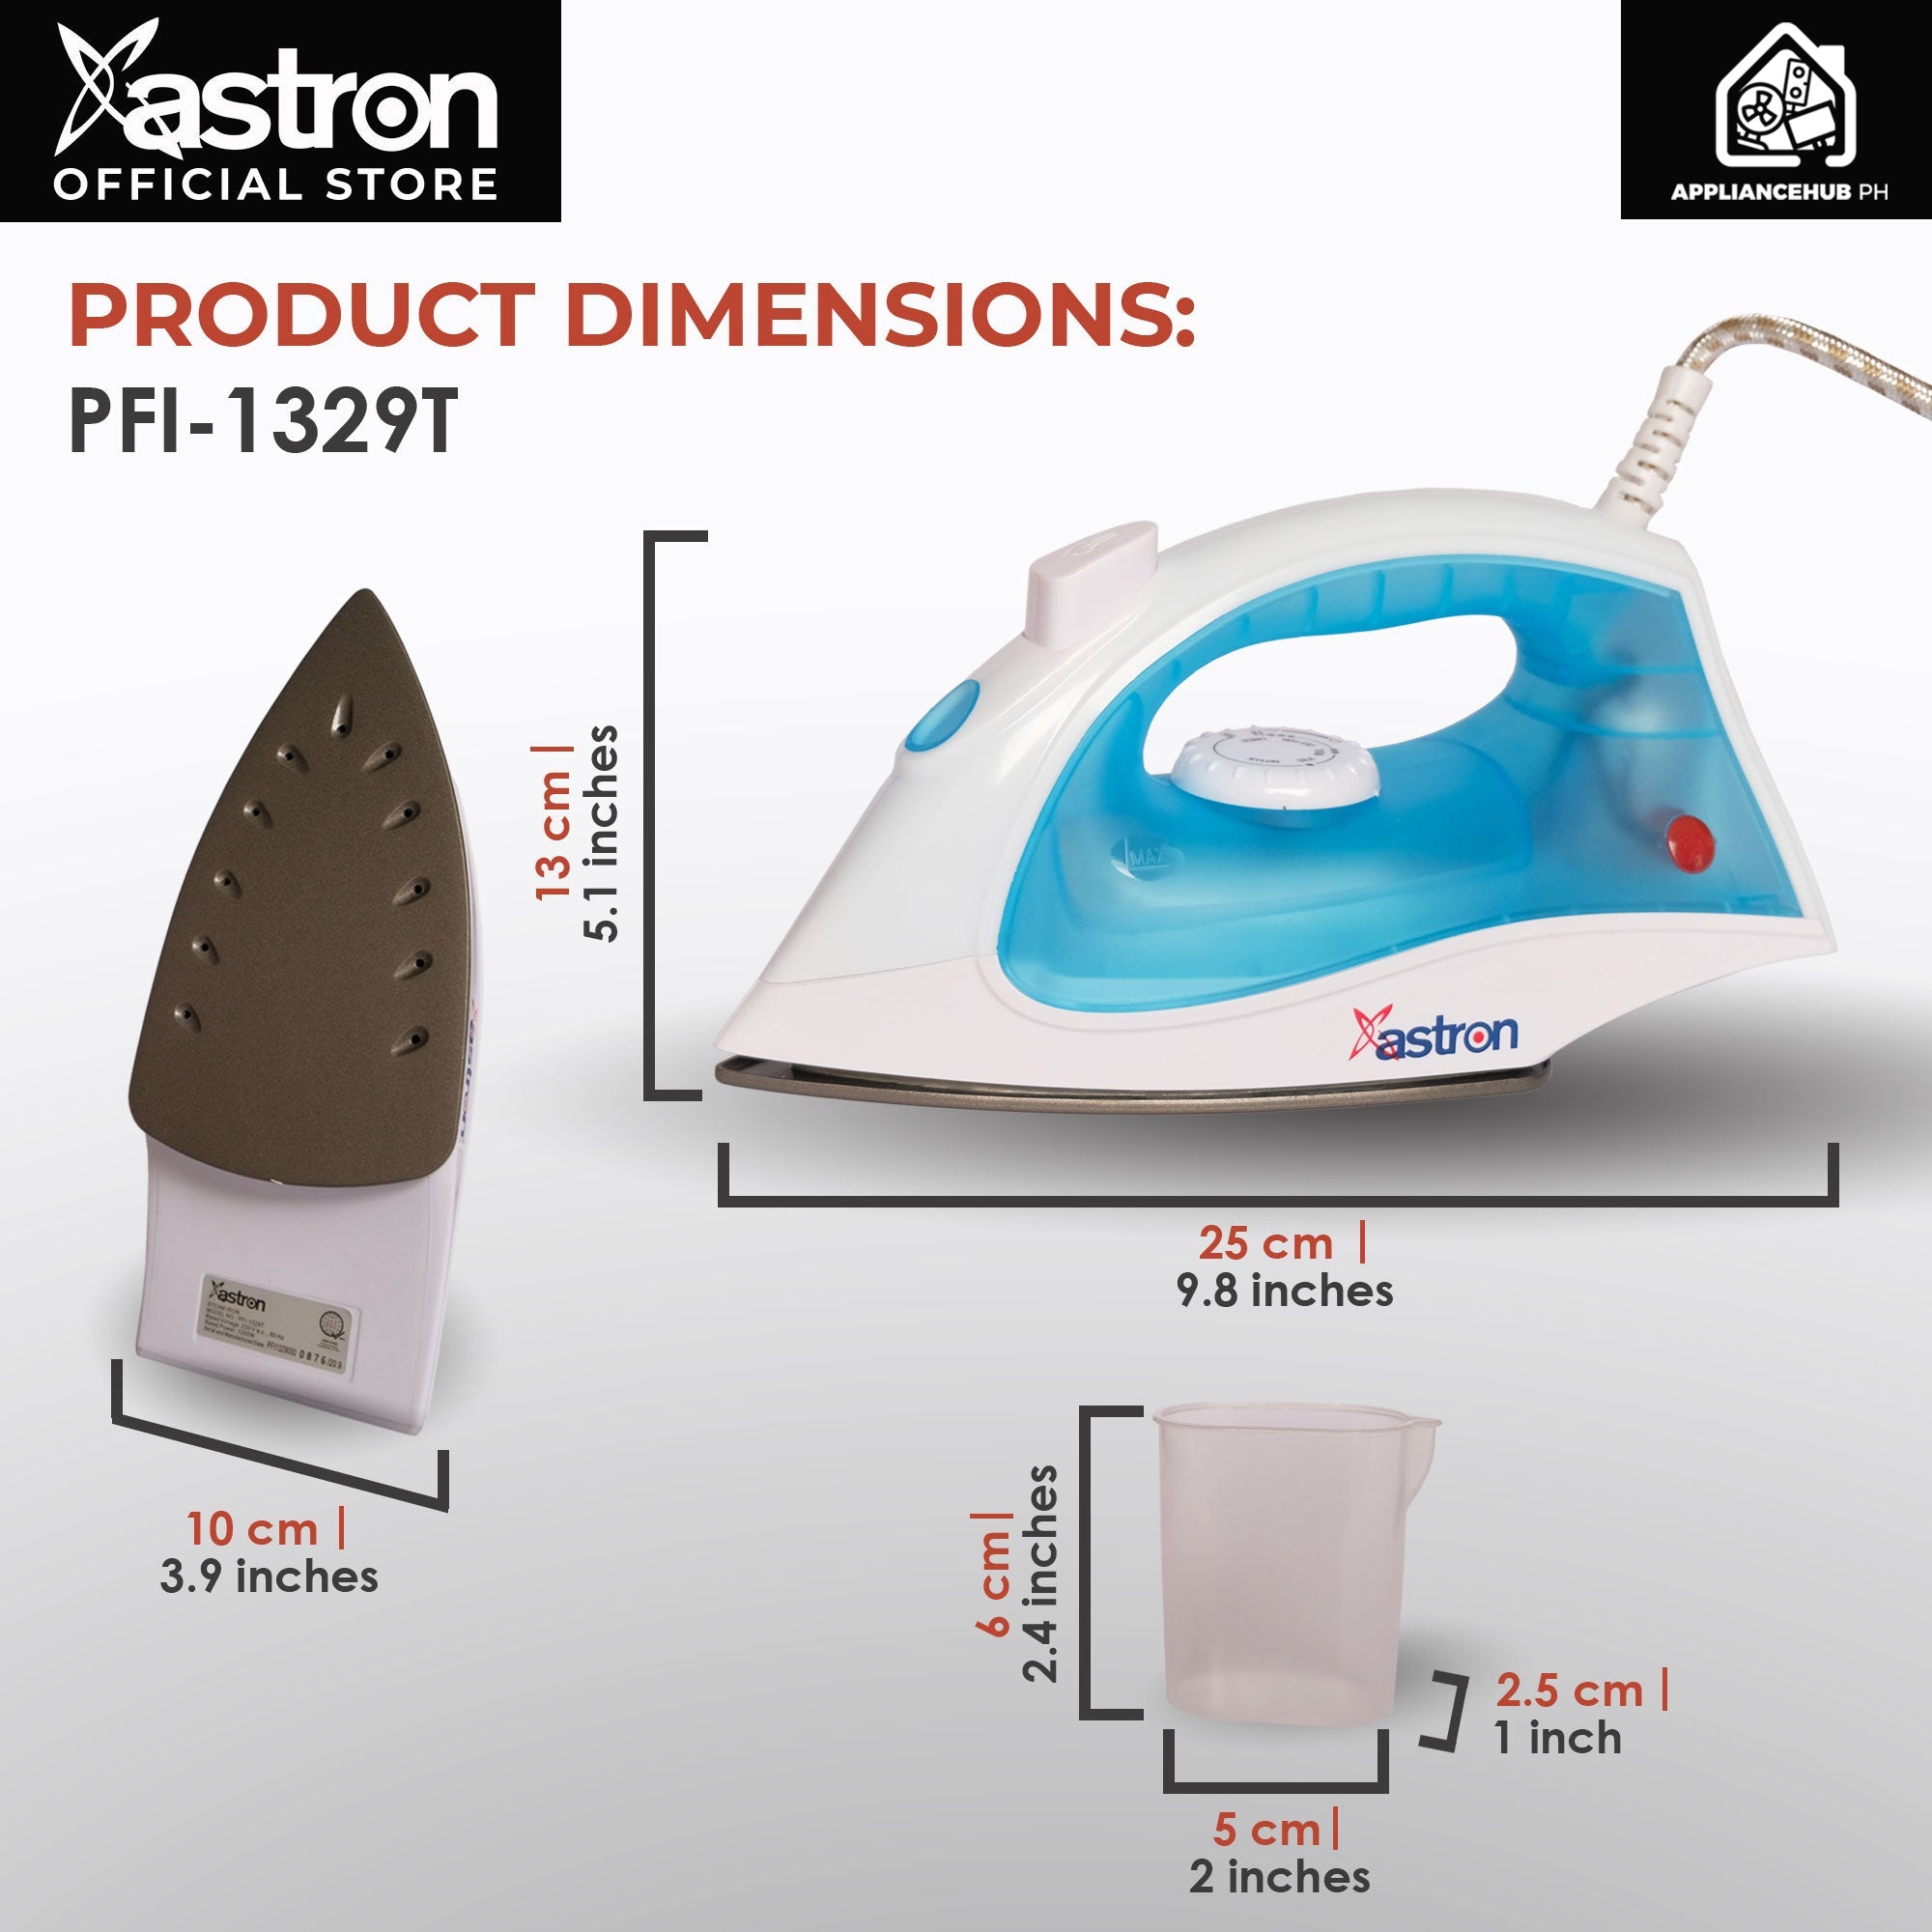 ASTRON PFI-1329T Dry and Steam Electric Flat Iron (1200W) with FREE cup built-in steamer Astron